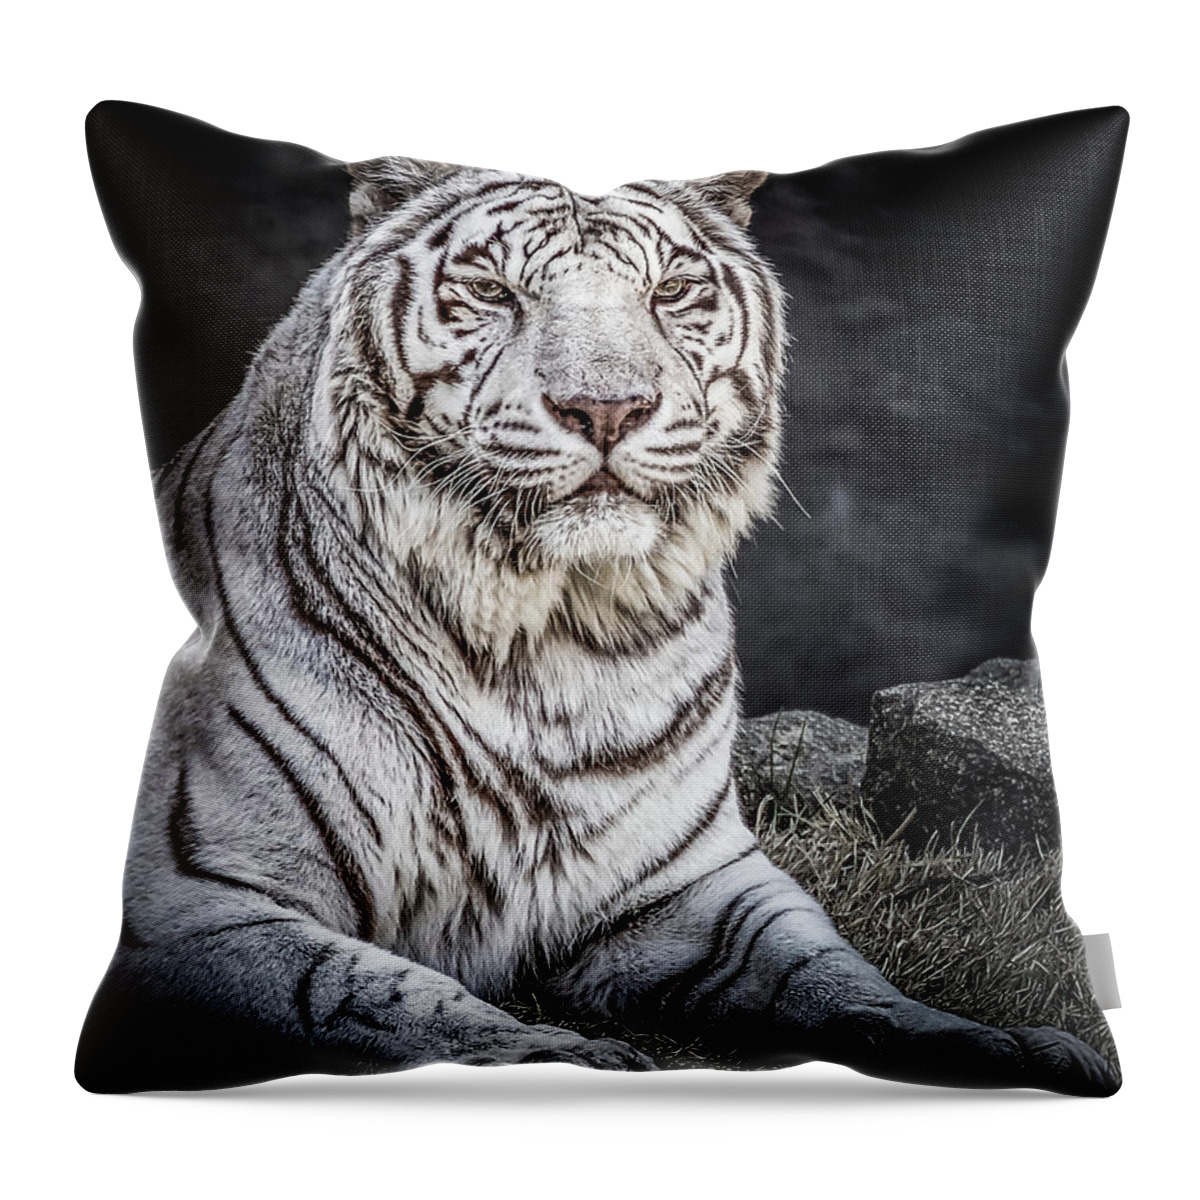 Big Cat Throw Pillow featuring the photograph White Tiger by Ron Pate